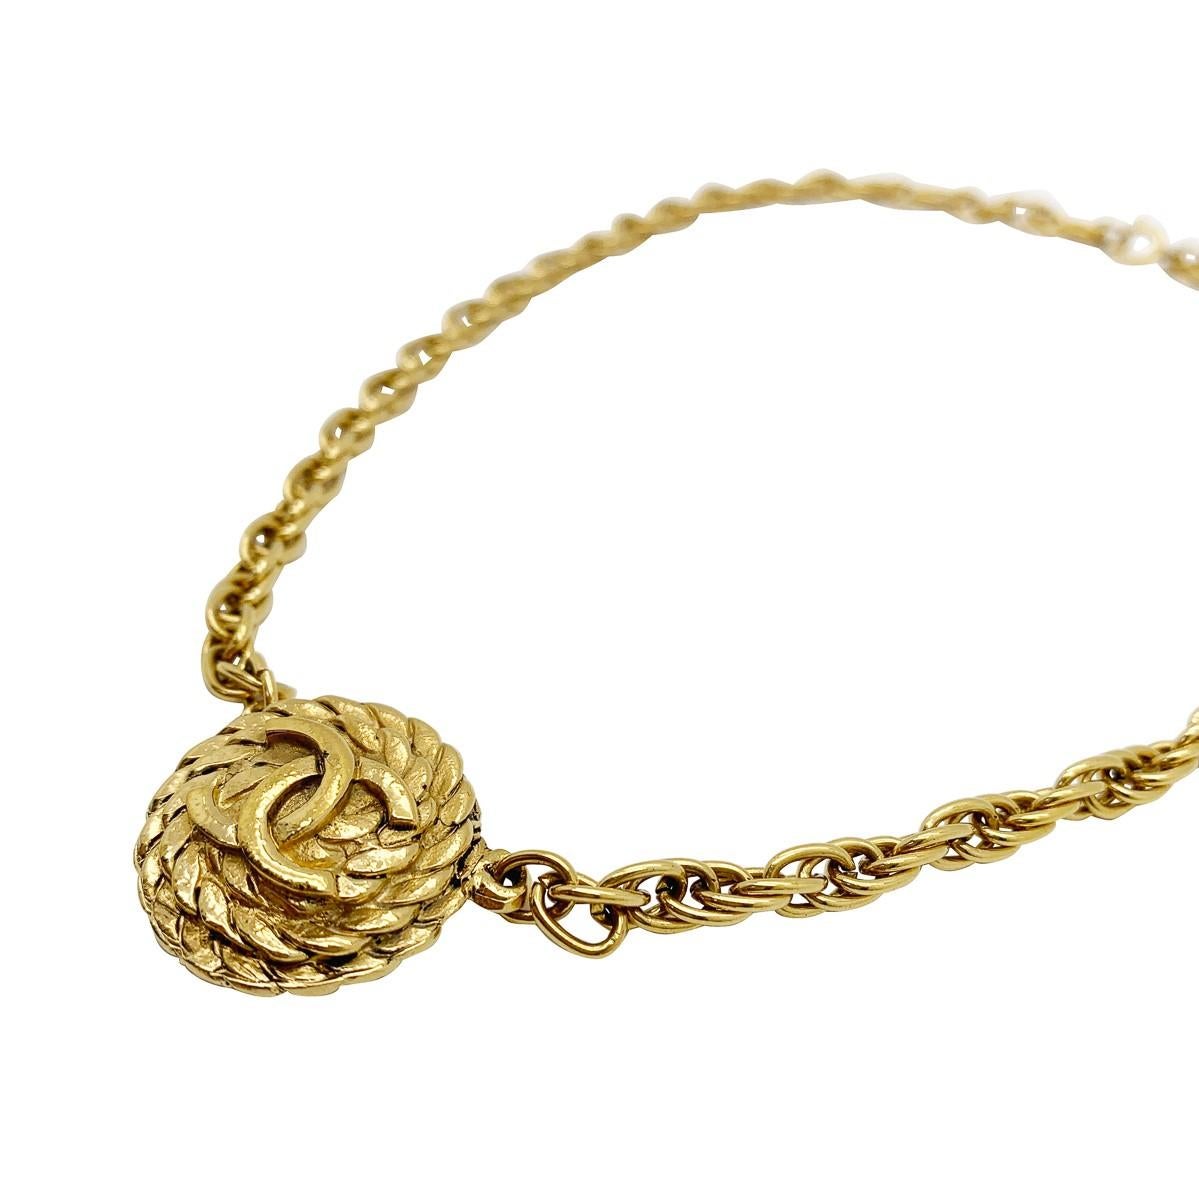 An iconic vintage Chanel rope logo necklace boasting the iconic interlocking Cs upon a coiled rope medallion. Set within a chunky chain this piece will undoubtedly turn heads owing to its heritage.

Vintage Condition: Very good without damage or